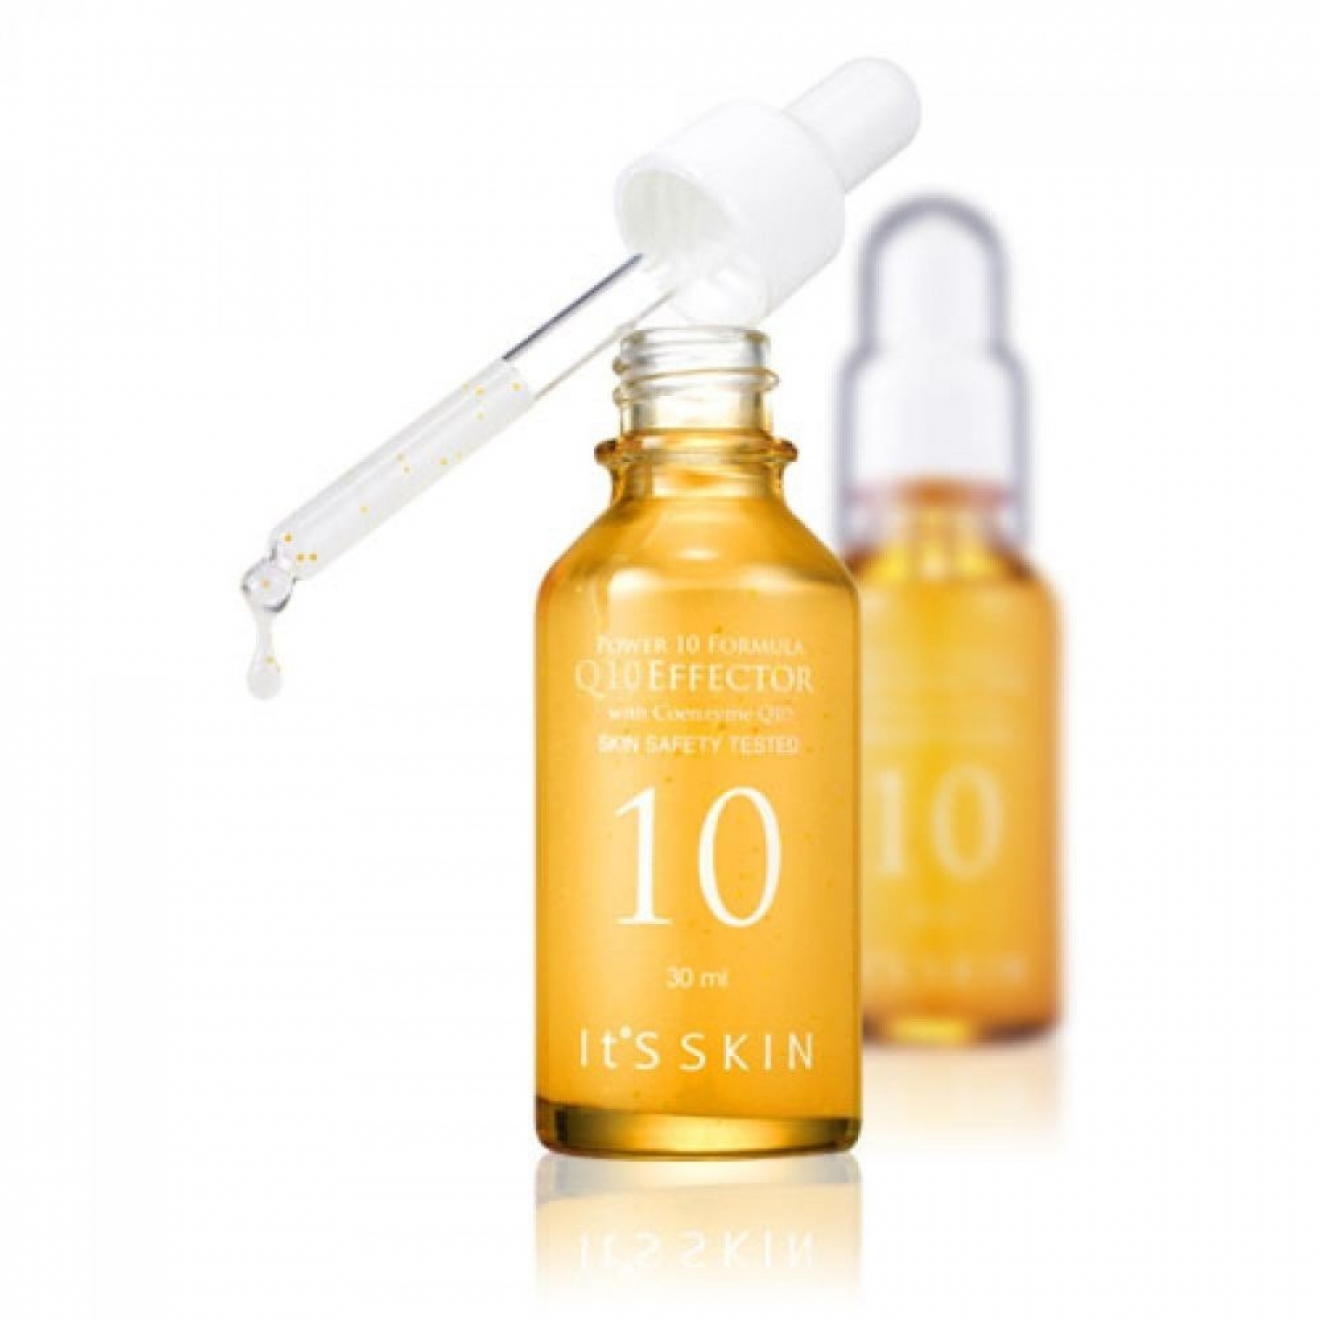 Its Skin, Power Formula Q10 Effector with Coenzyme Q10